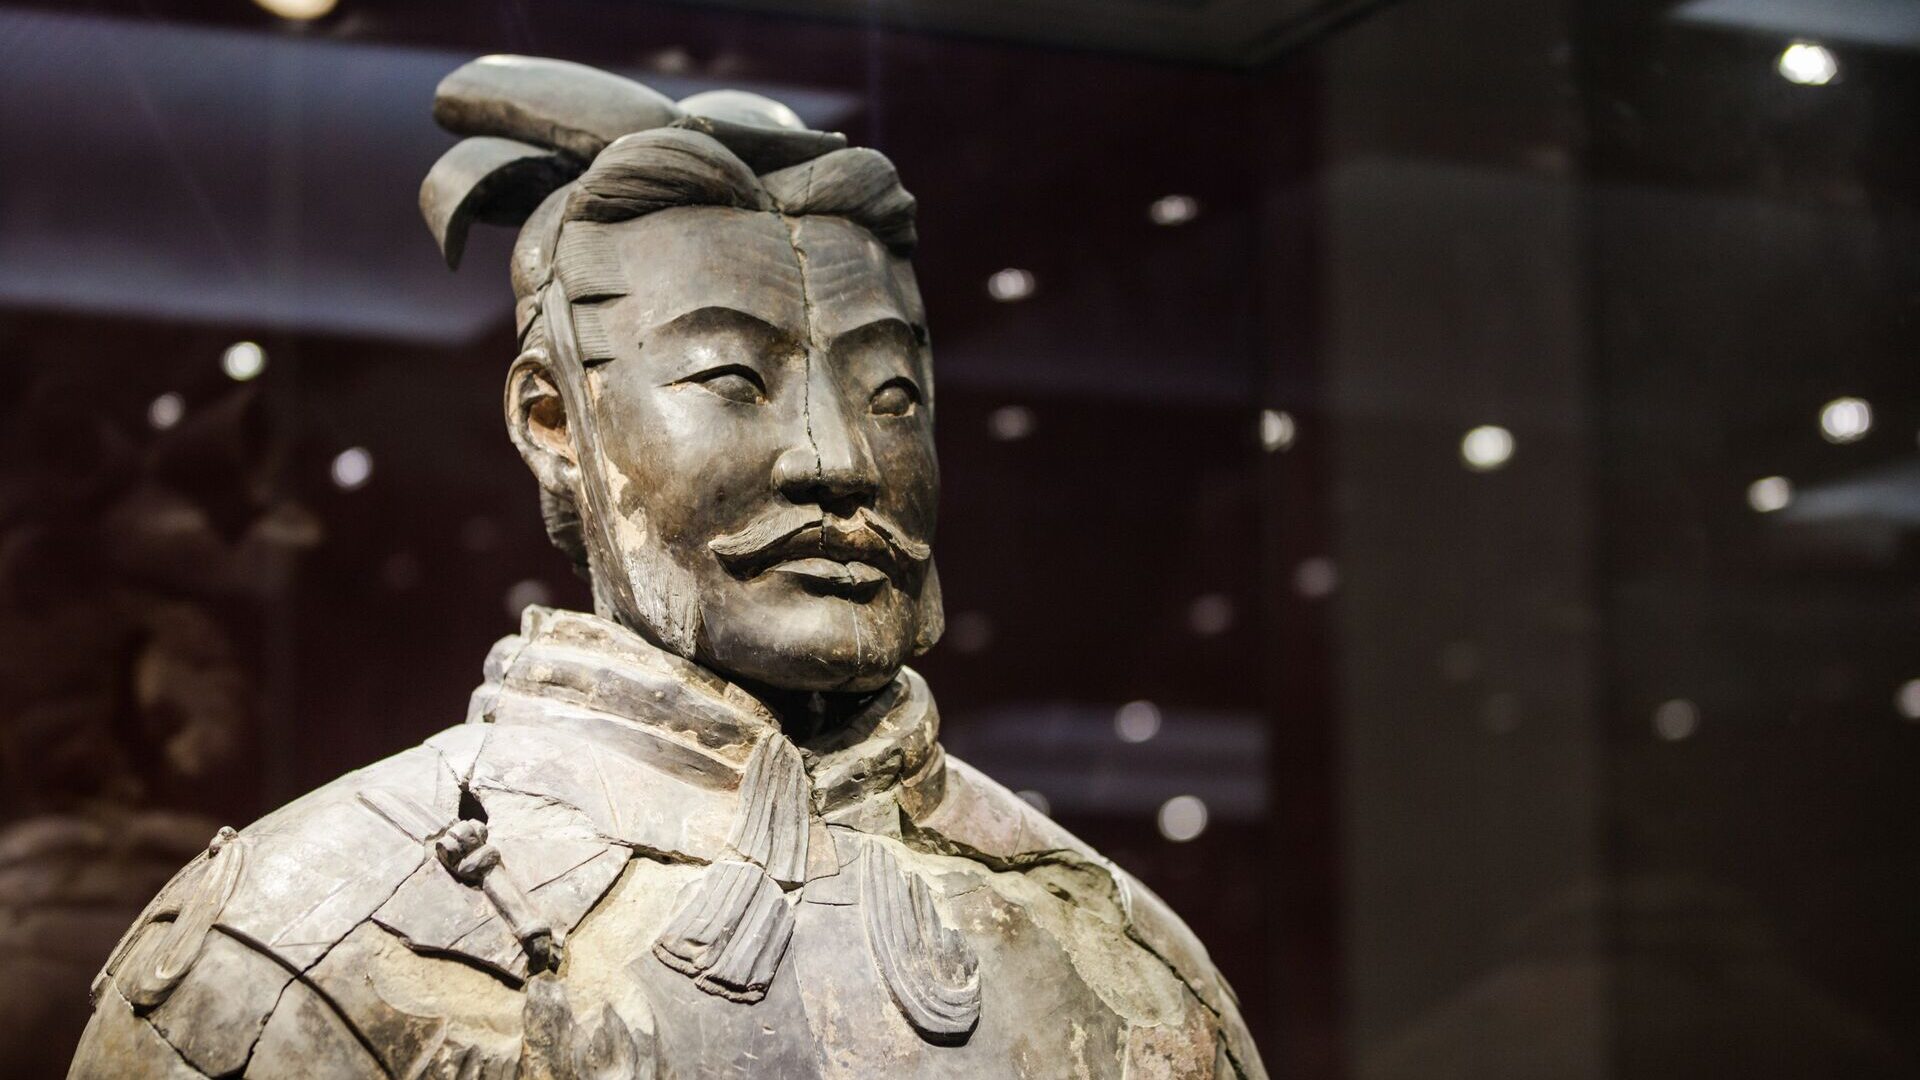 Statue of Qin dynasty